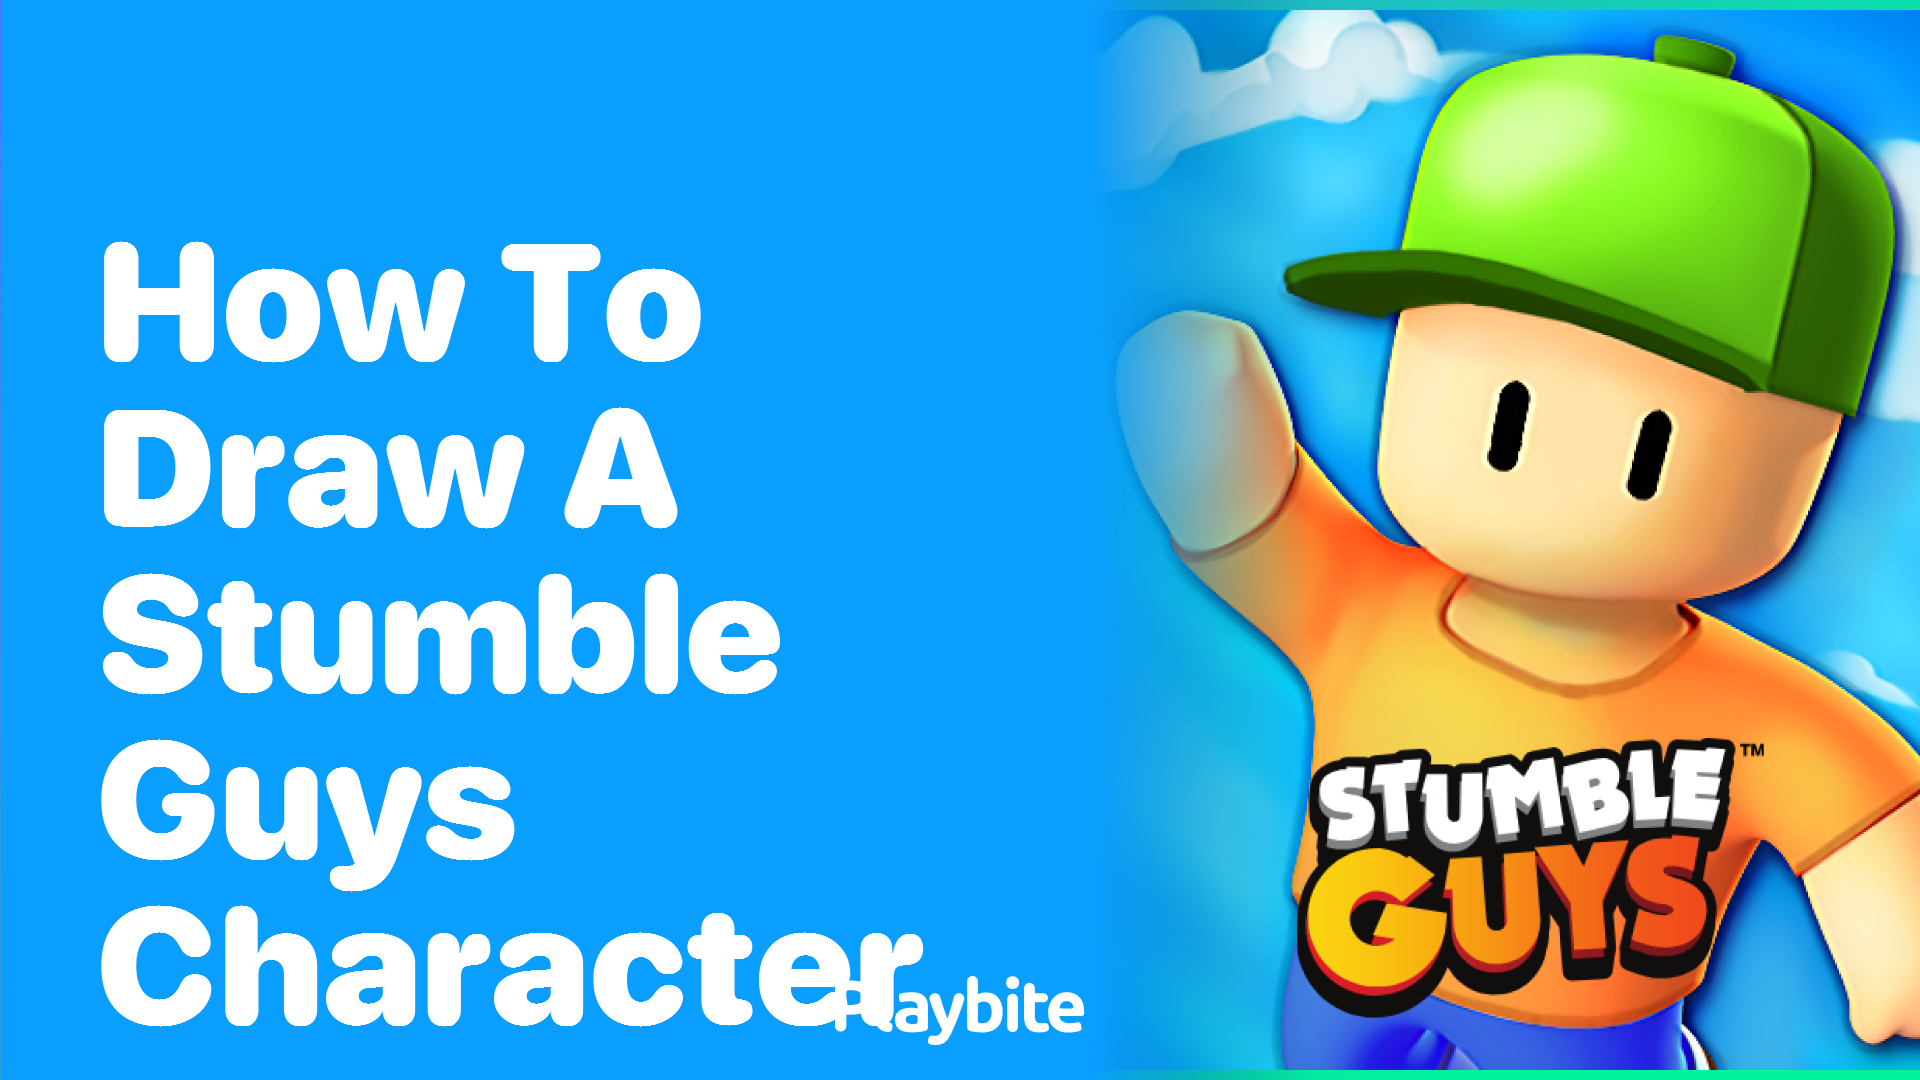 How to Draw a Stumble Guys Character